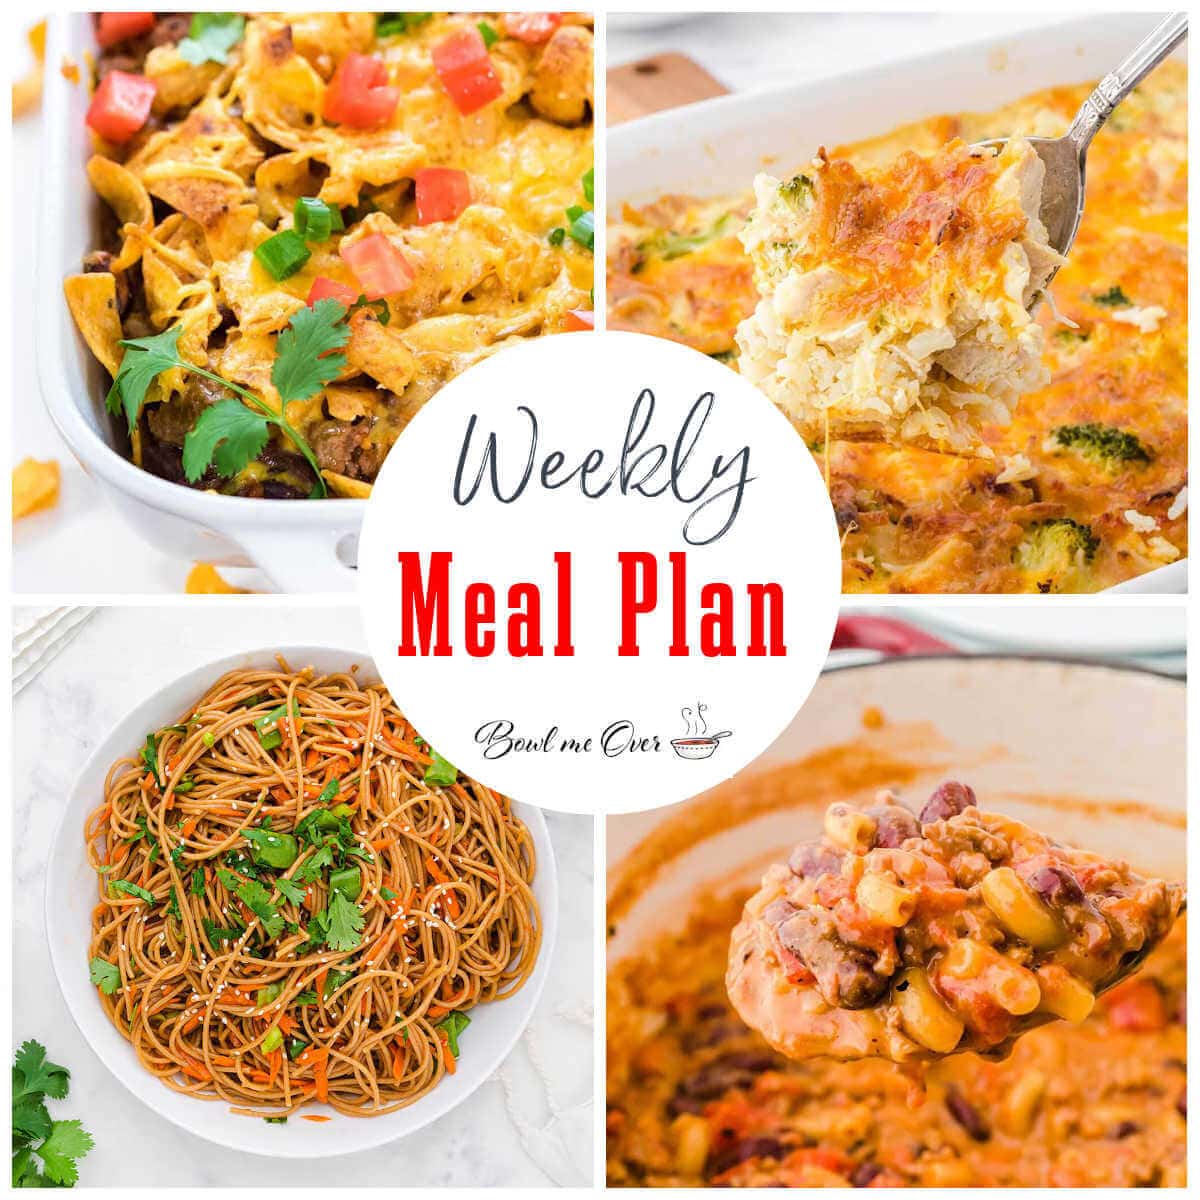 Weekly Meal Plan 49 with Print overlay.